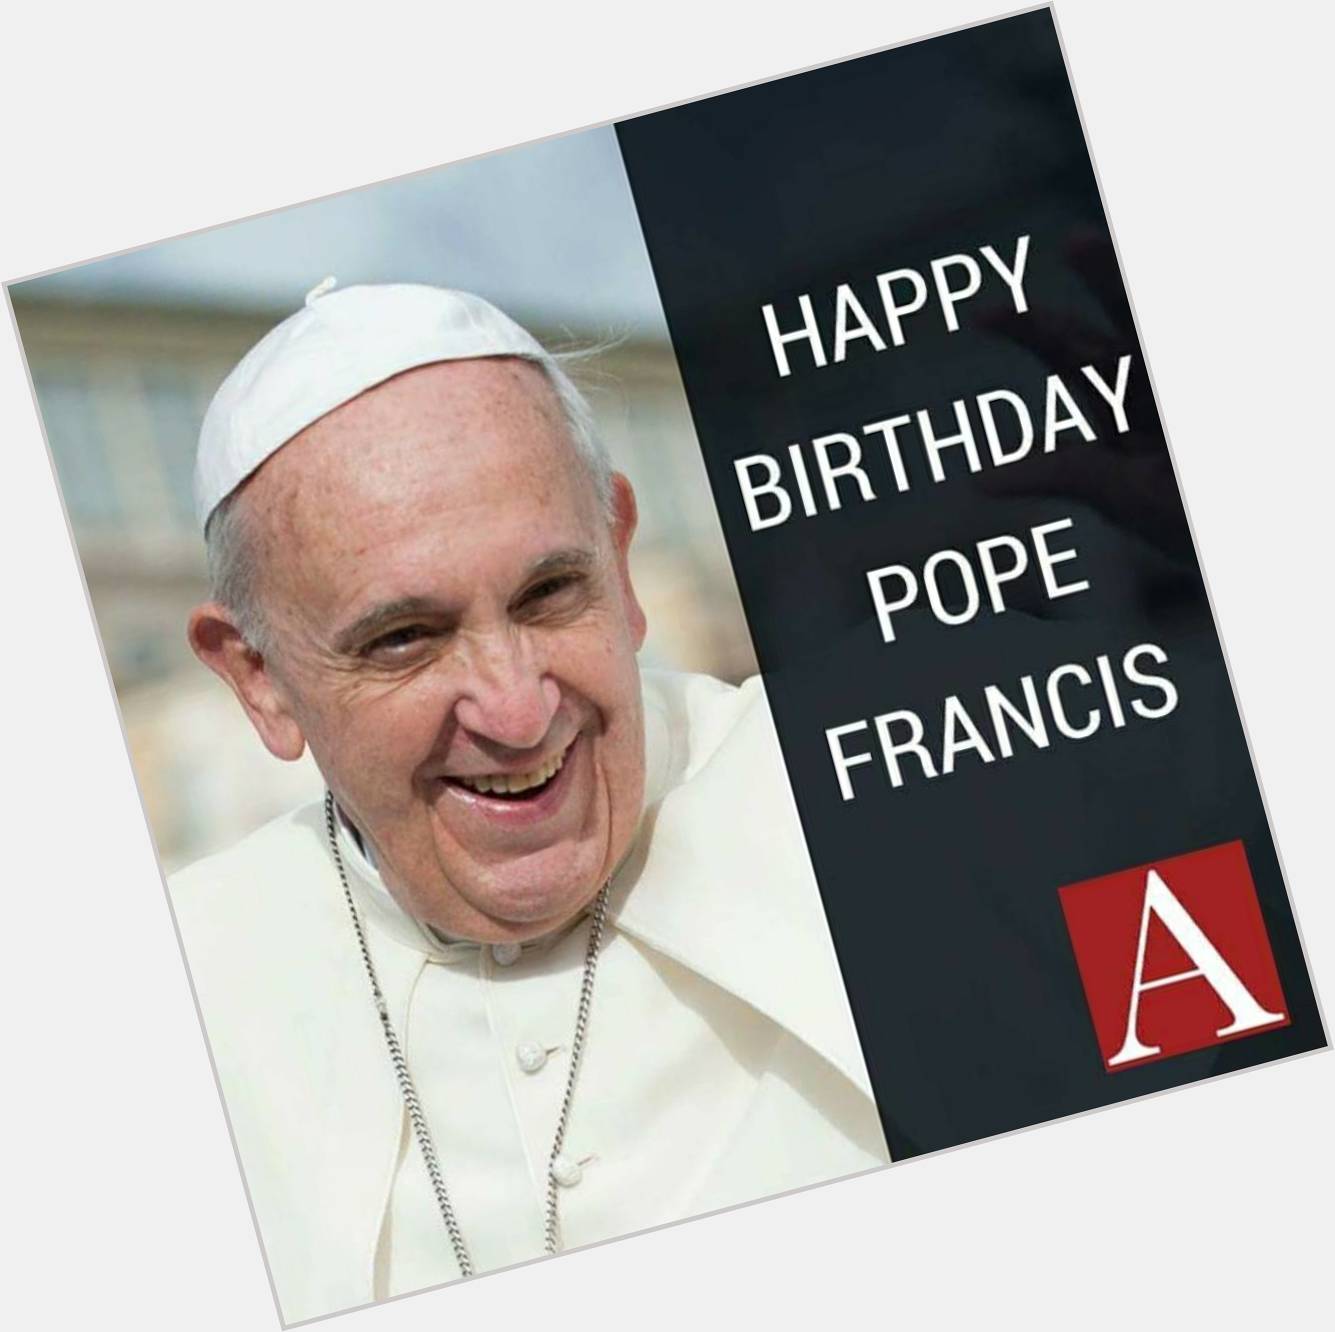 Happy Birthday Pope Francis! Thank you for your              